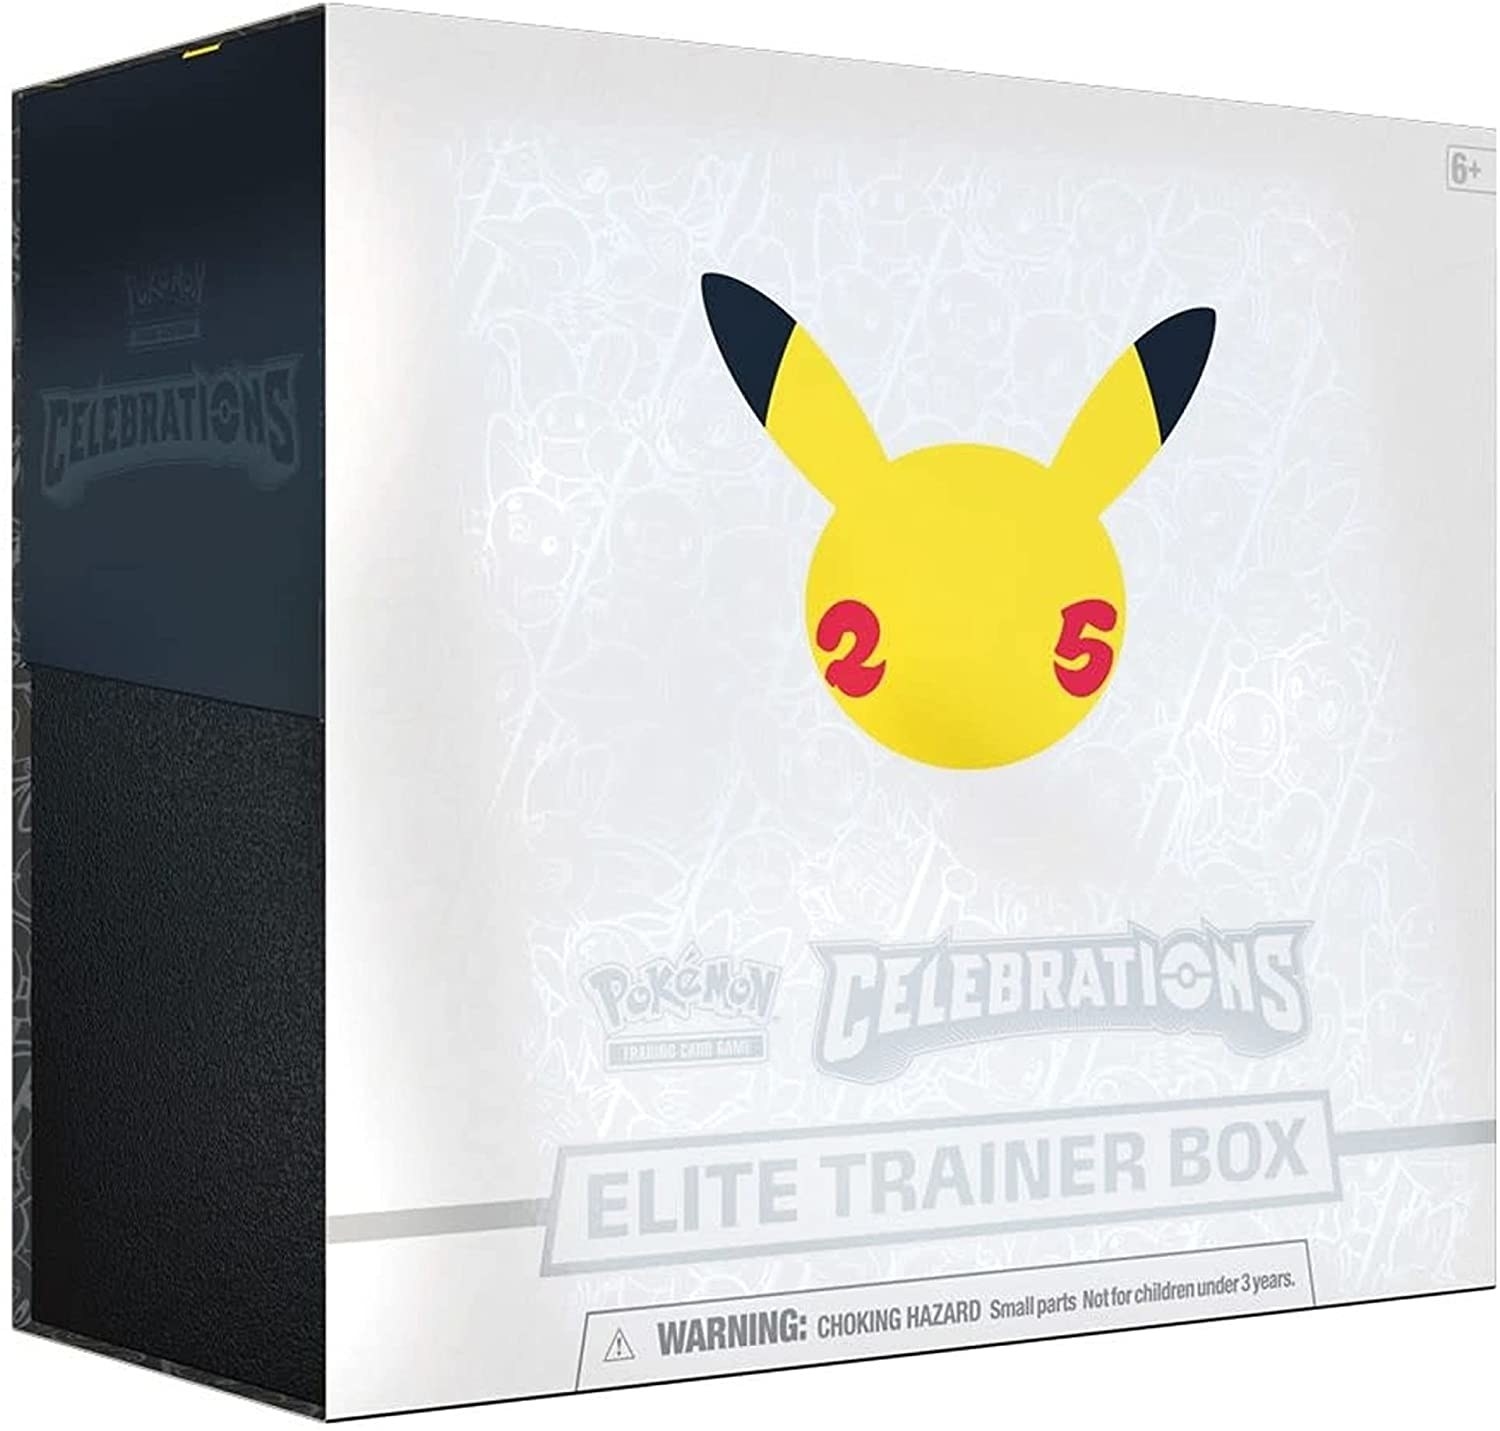 the elite trainer box that has pikachu logo on the font and the number 25